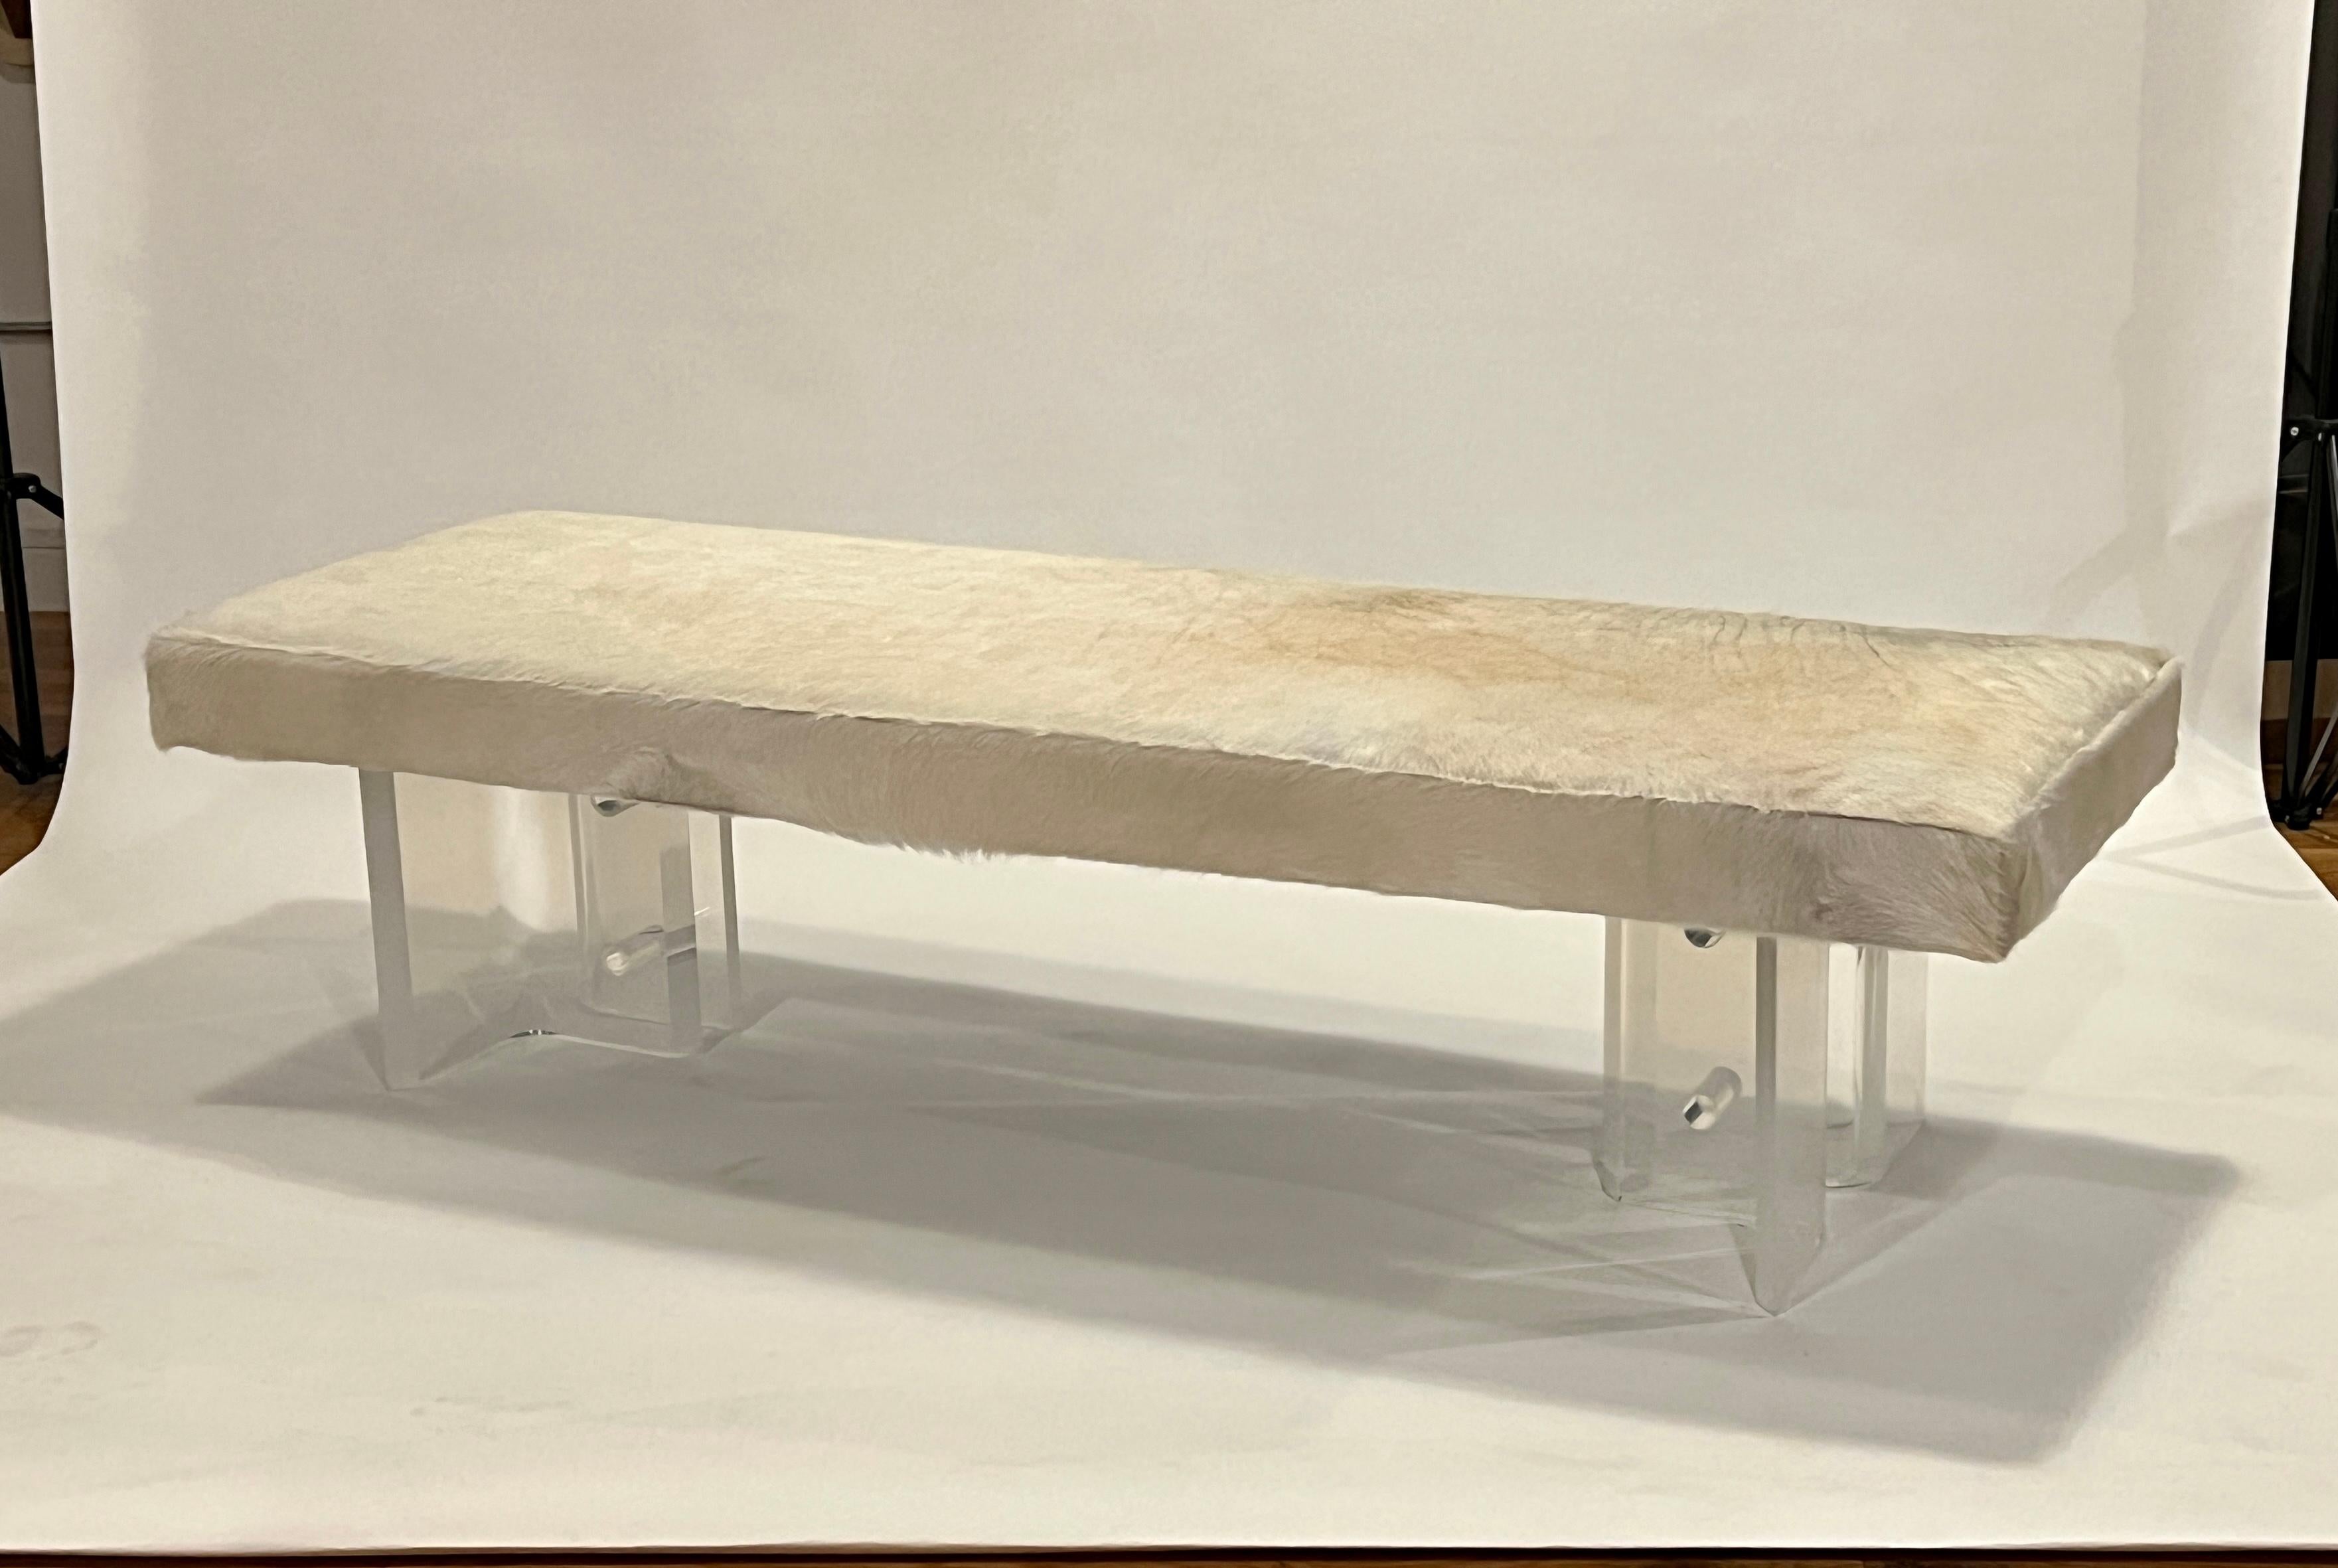 Midcentury lucite table bases have been reimagined into a long bench freshly upholstered in blonde cowhide. 
This sturdy and well-crafted bench features a box stitch seat and decorative lucite bases. A thick platform was installed to prevent bowing